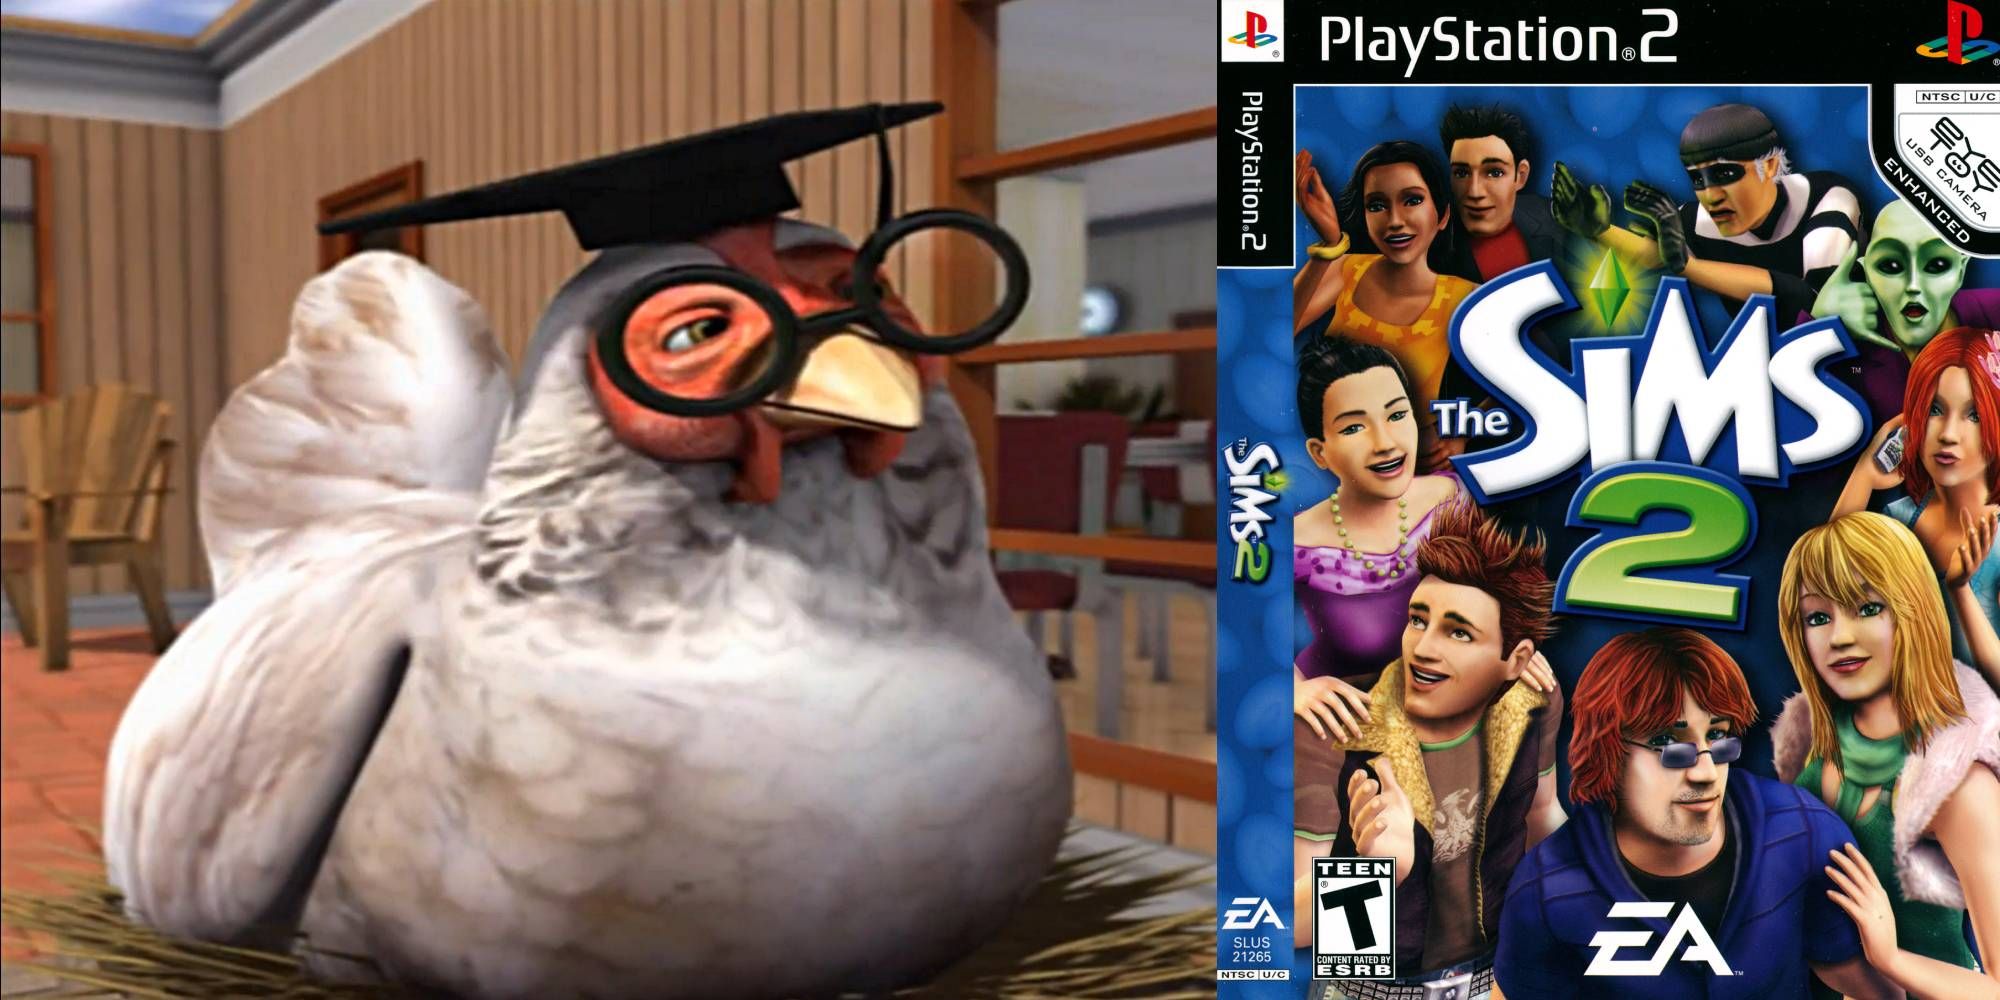 The Sims 2 cover art next to the chess playing chicken featured in game